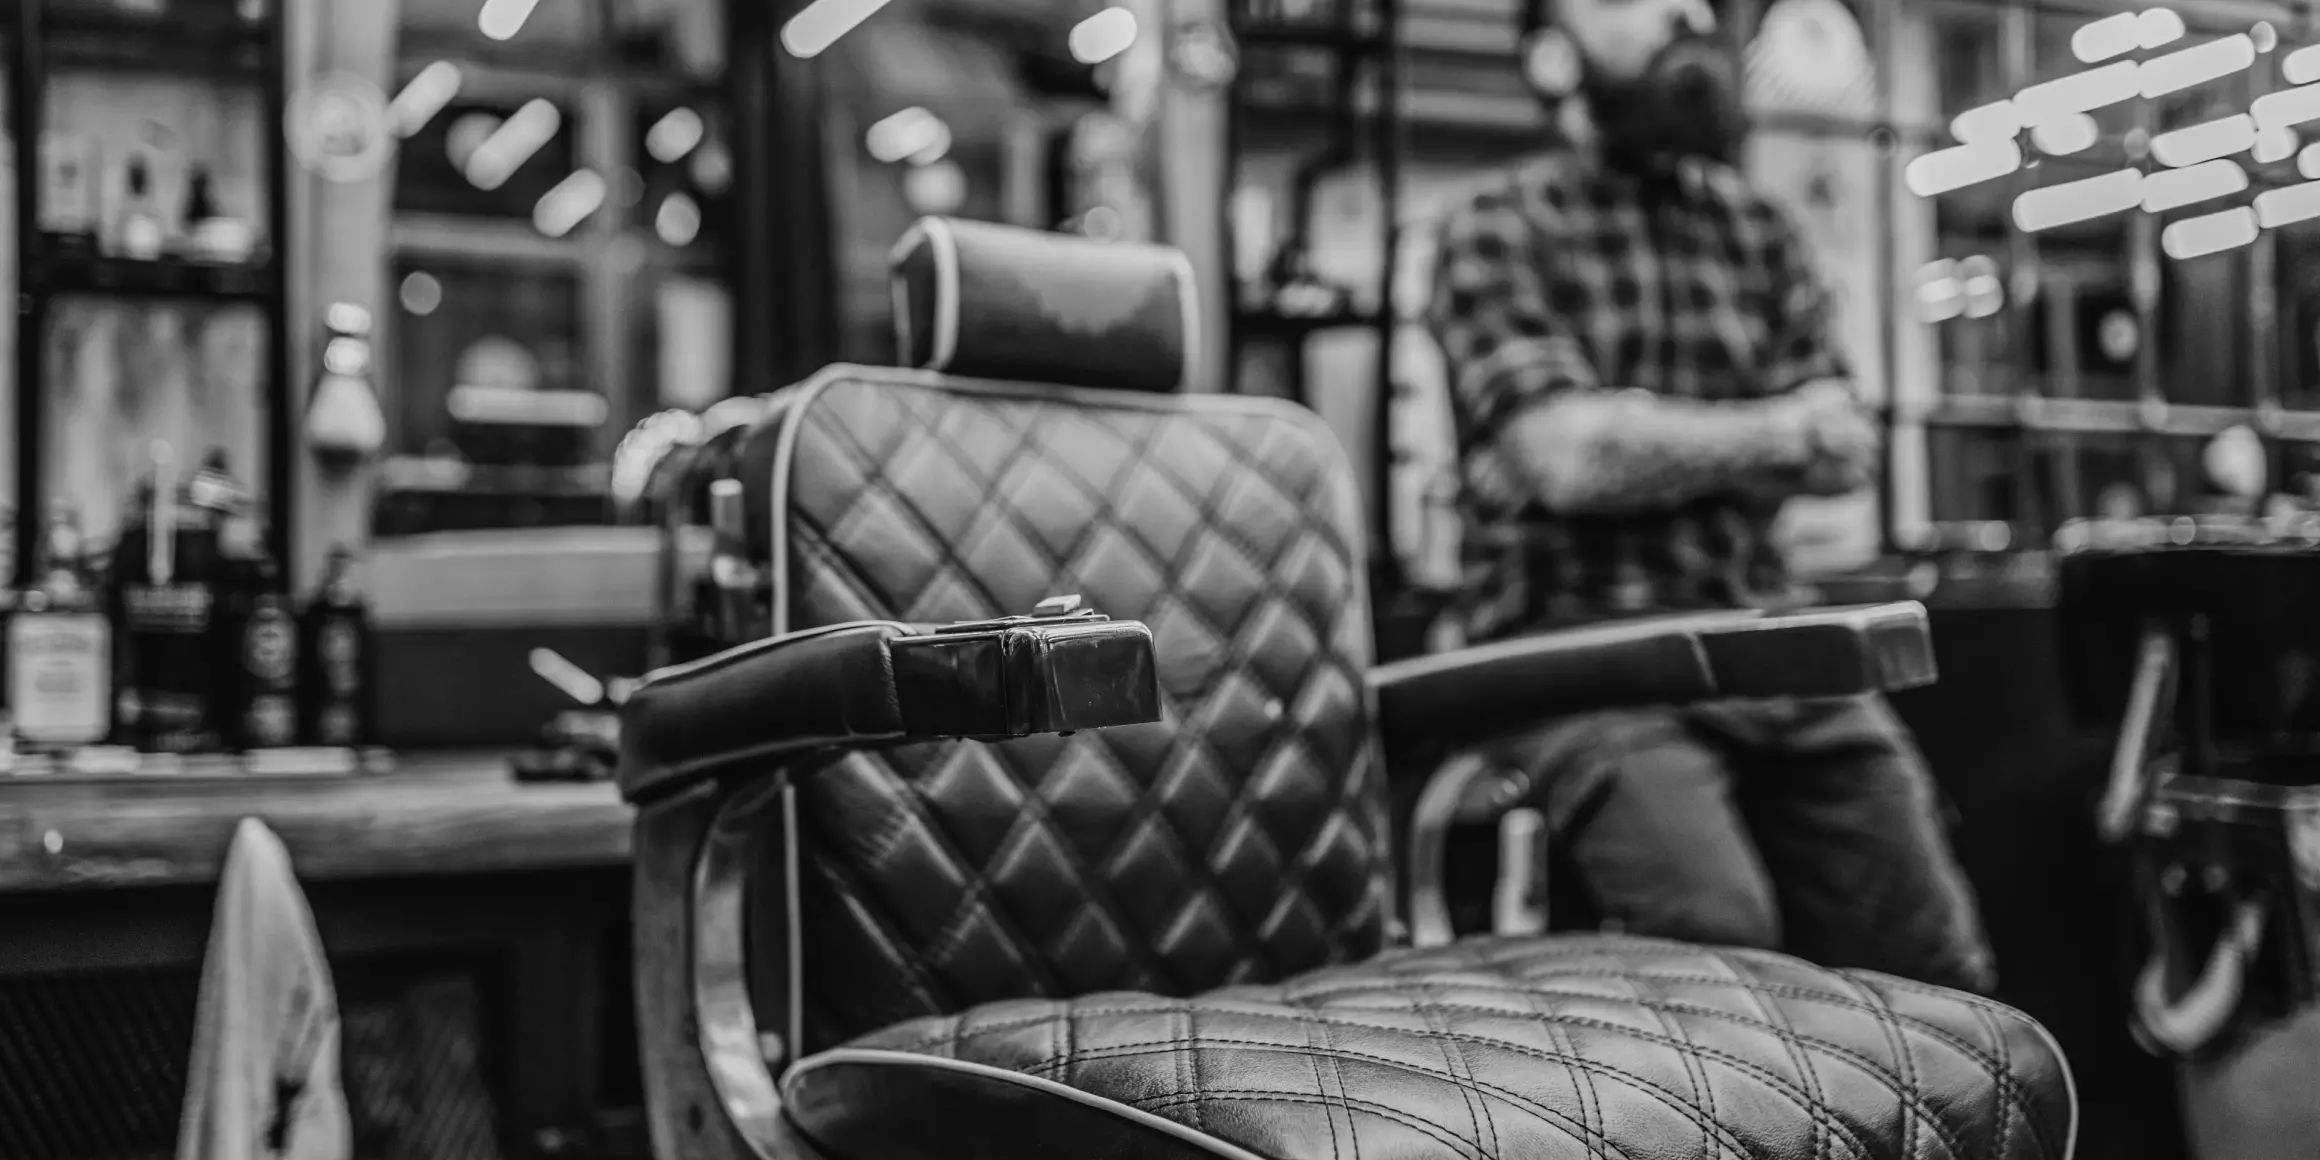 barber chair in the barber shop